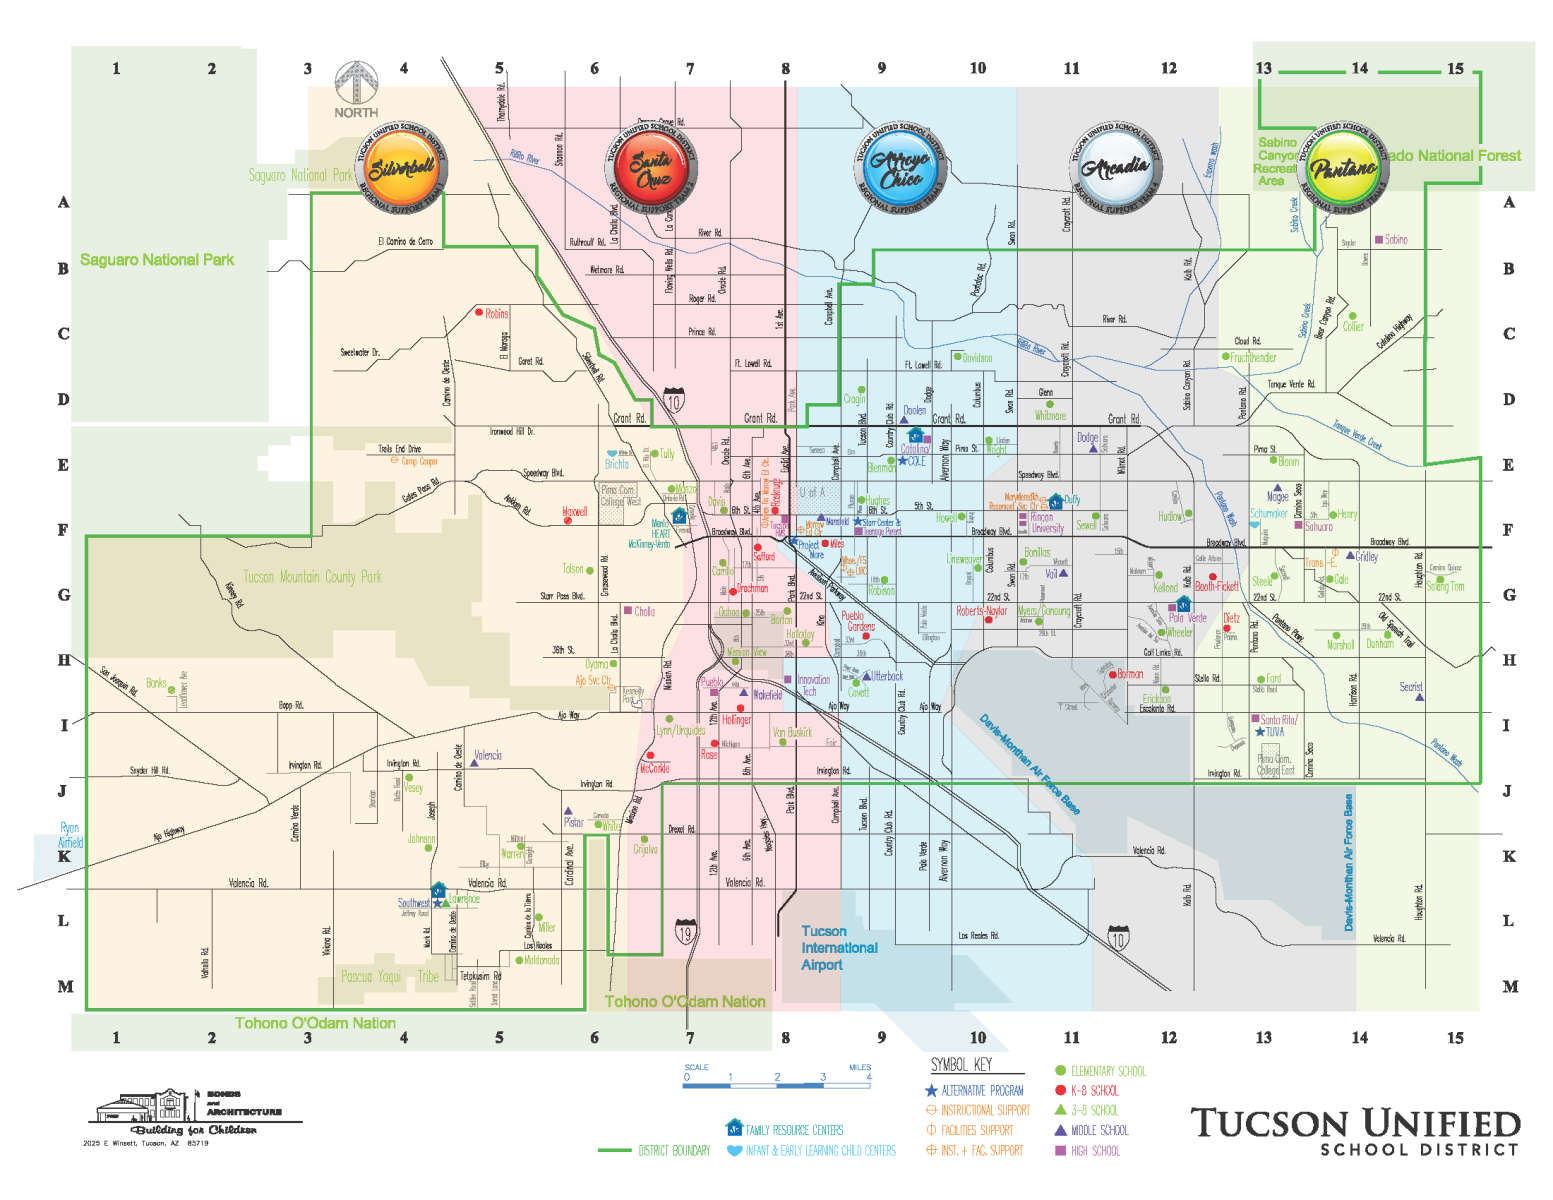 Color version of attendance boundary map showing the regions of Tucson Unified School District. 